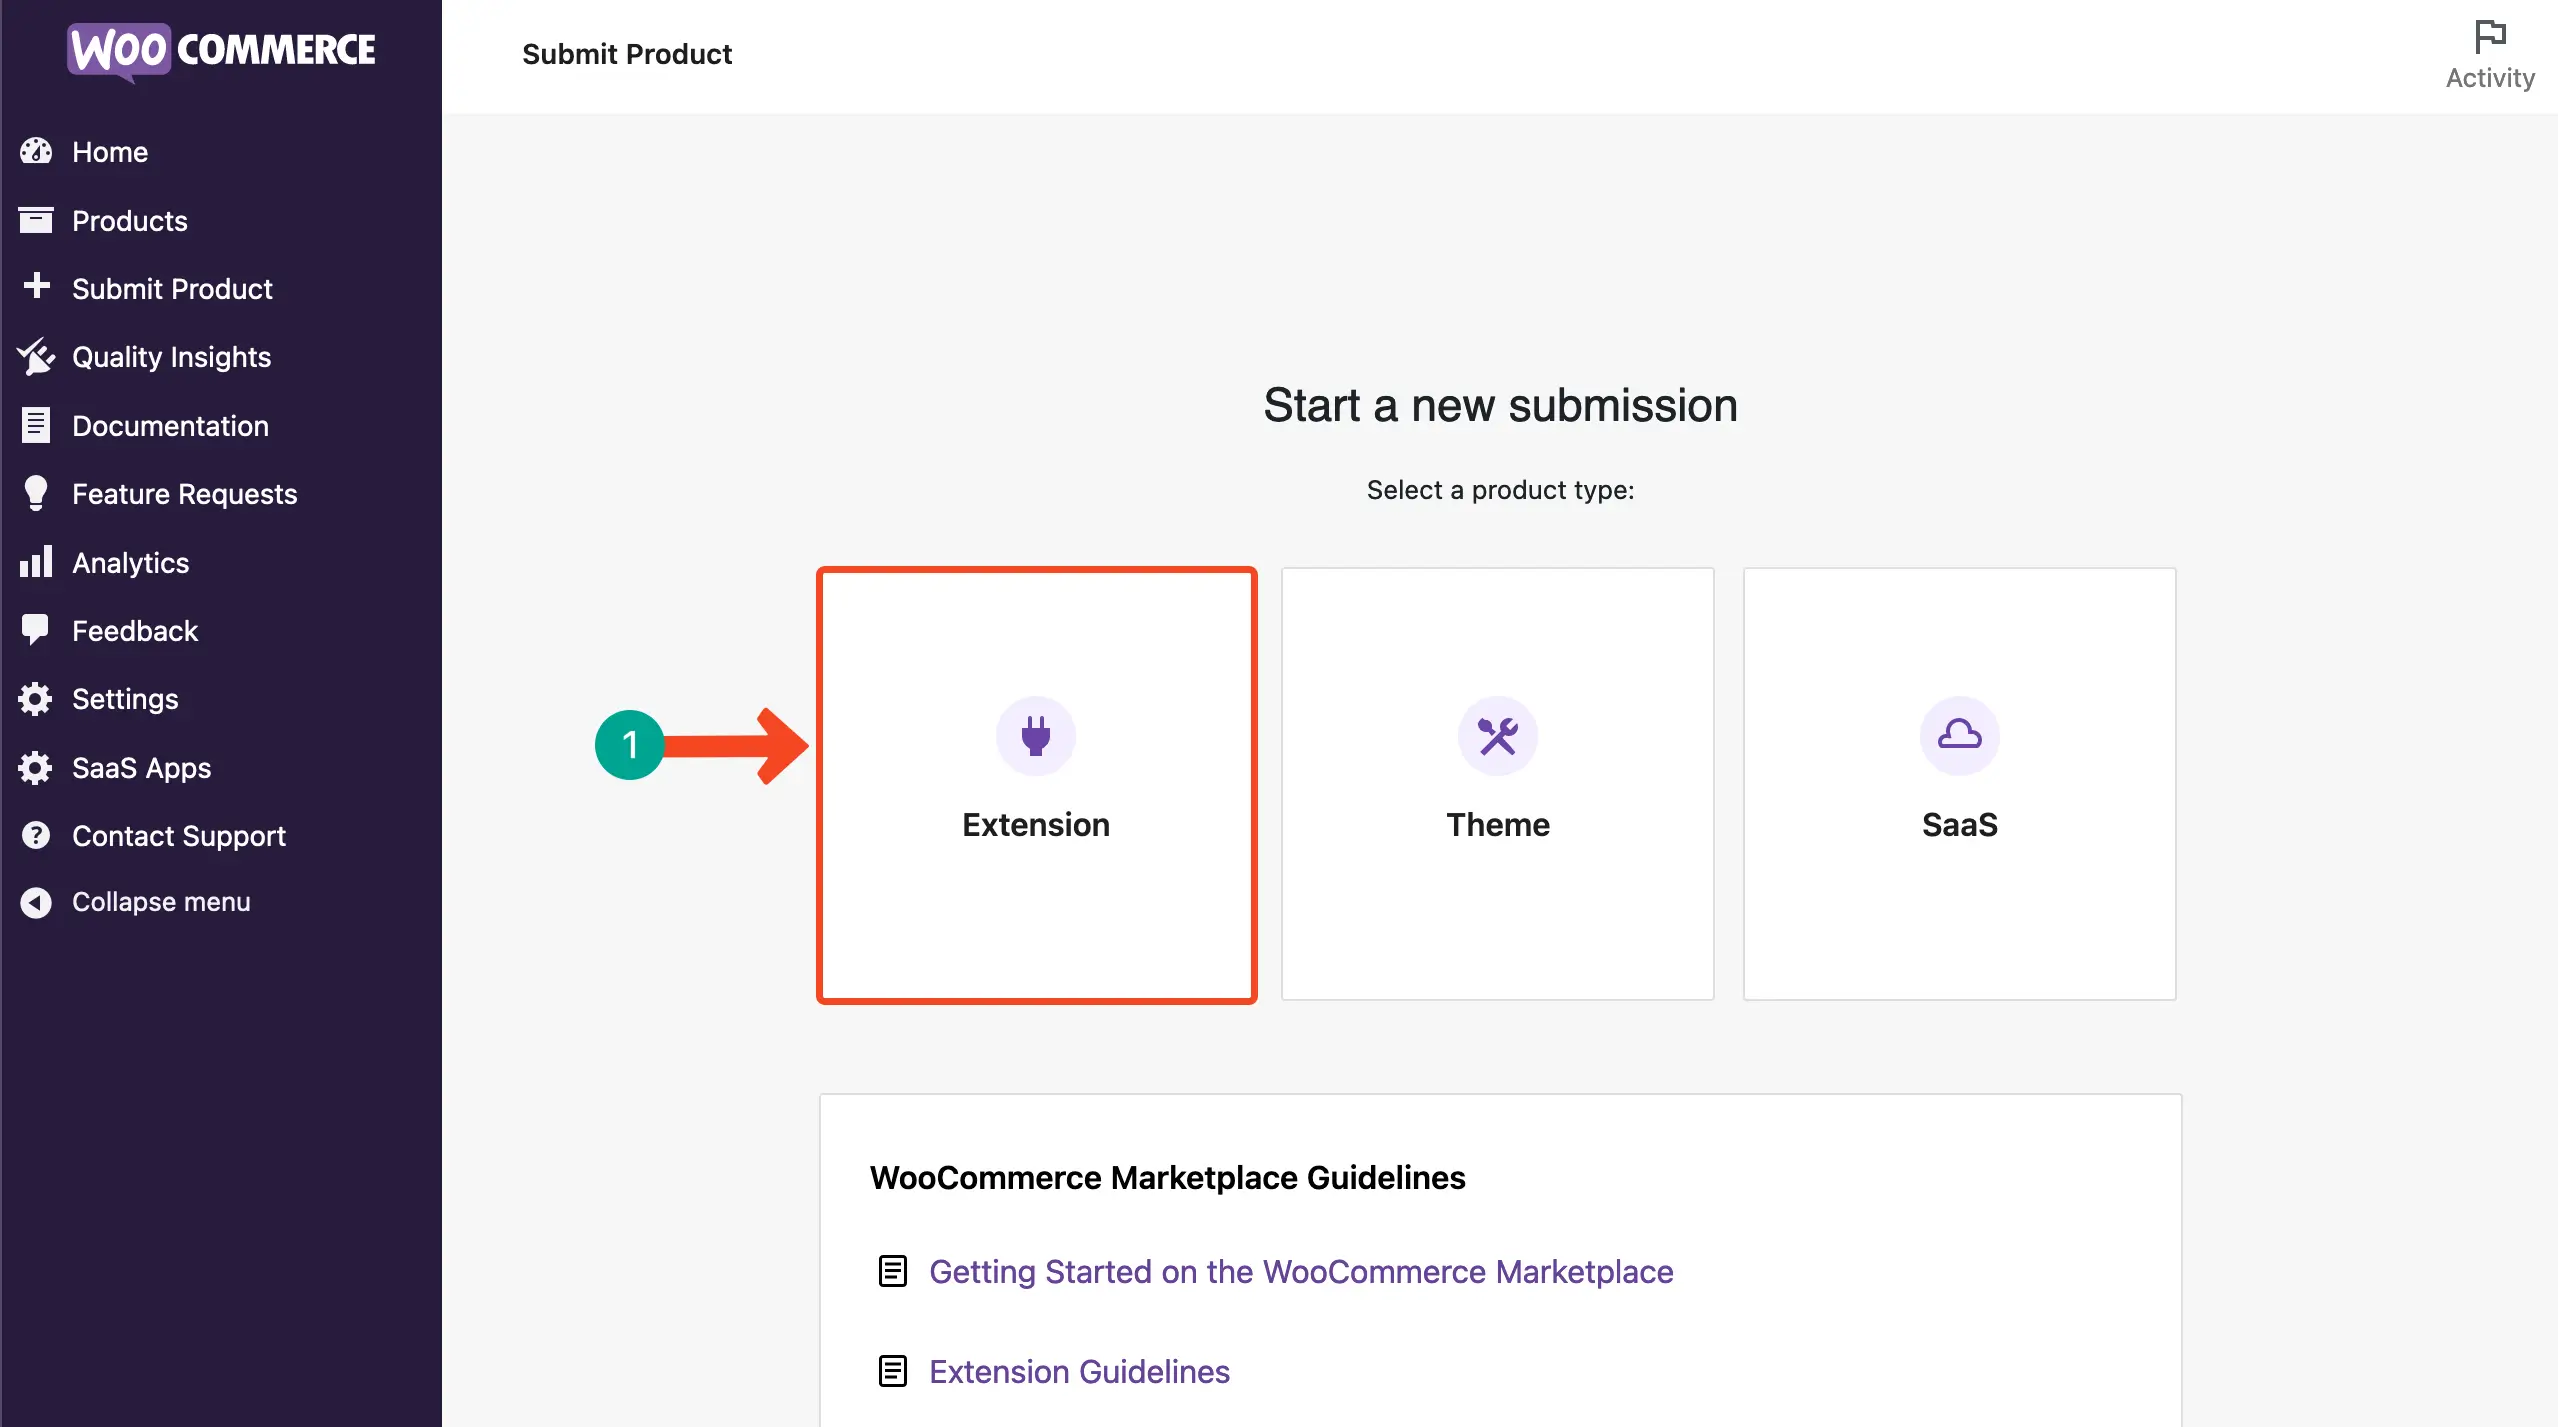 Start a new submission in the WooCommerce Marketplace